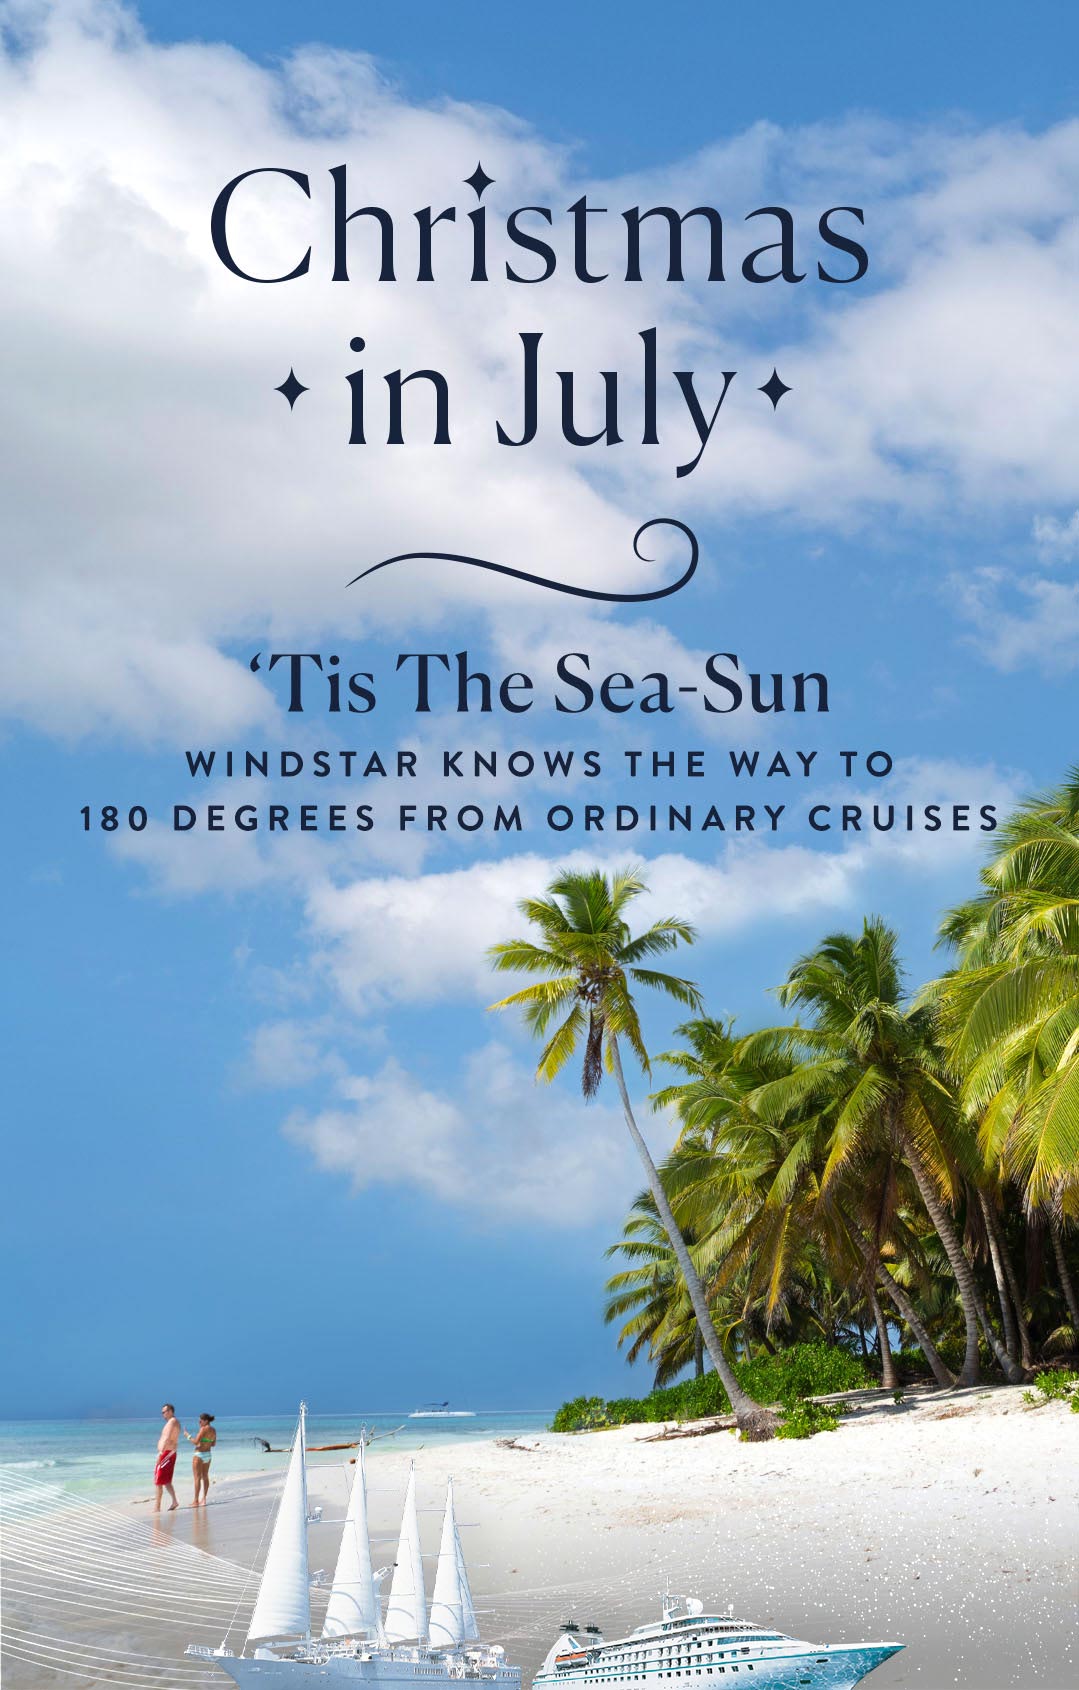 An image of a couple on a beach with lush palm trees behind them. A headline reads Christmas in Juy, 'Tis the Sea-Sun. Windstar knows the way to 180 degrees from ordinary cruises.